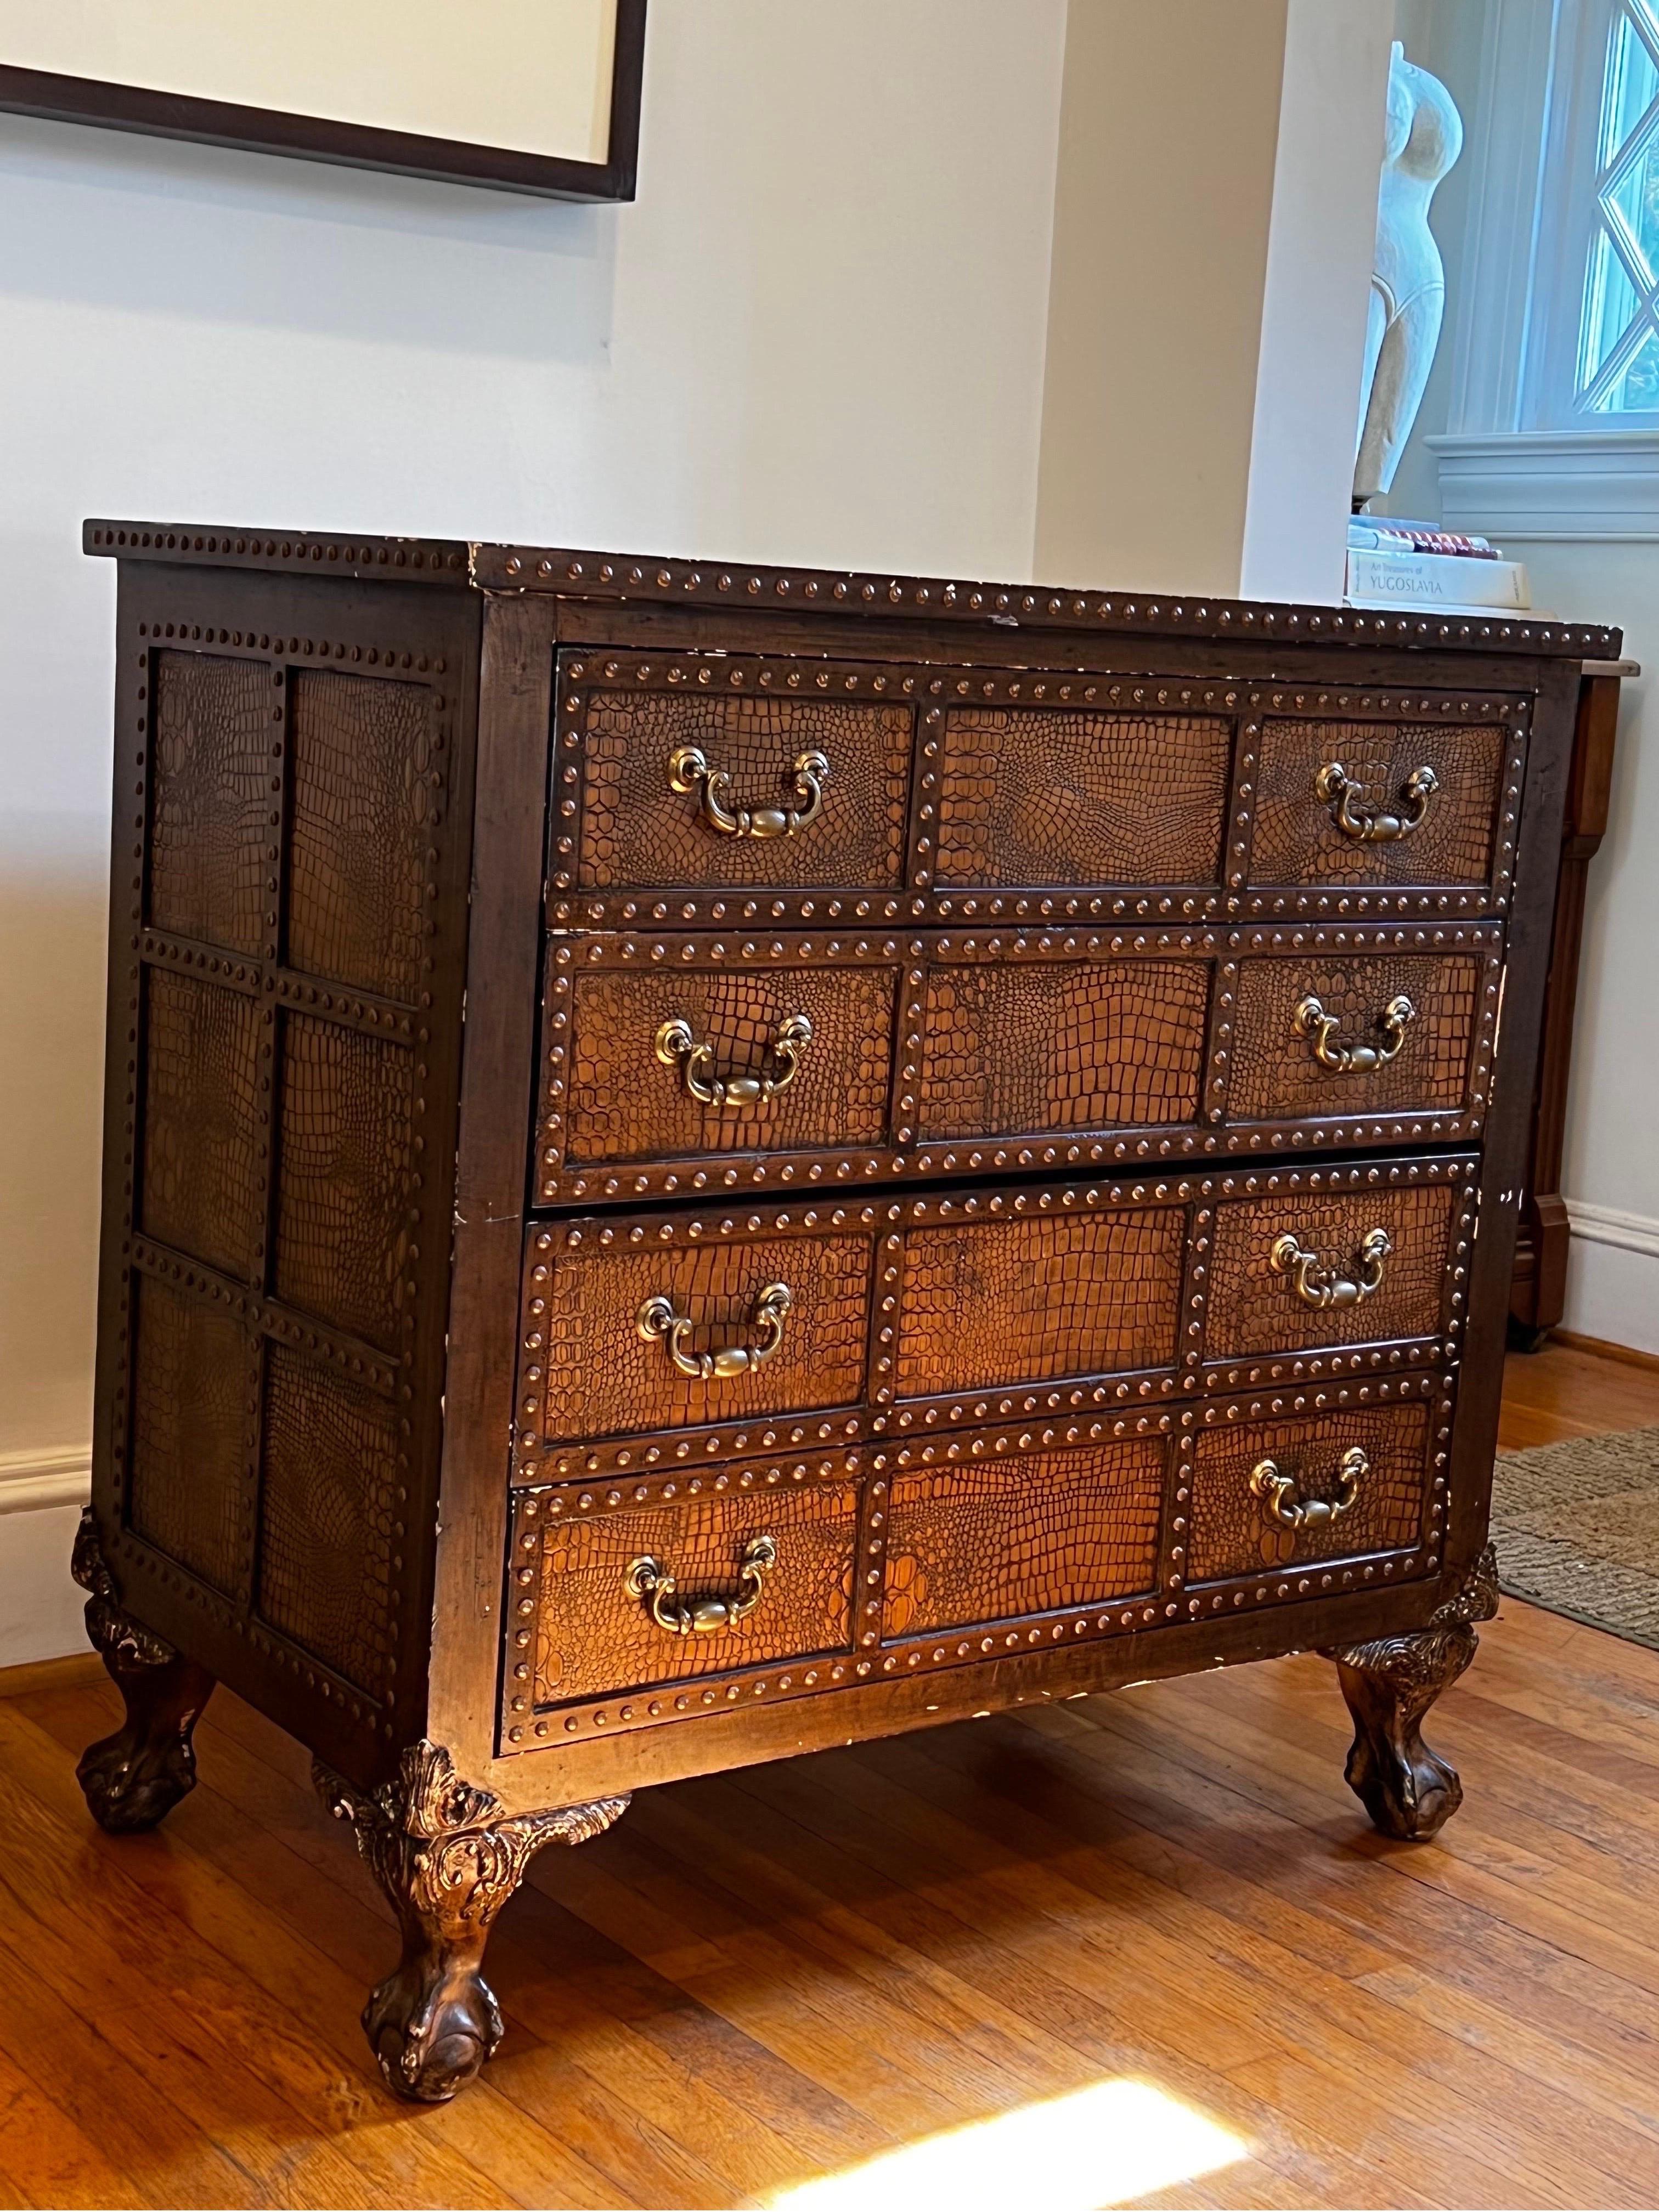 Custom Reptile skin dresser/commode with 4 drawers. Designed in France.
Brass stud details and carved legs. Brass hardware.

Made in Italy paper lining inside each drawer. 

